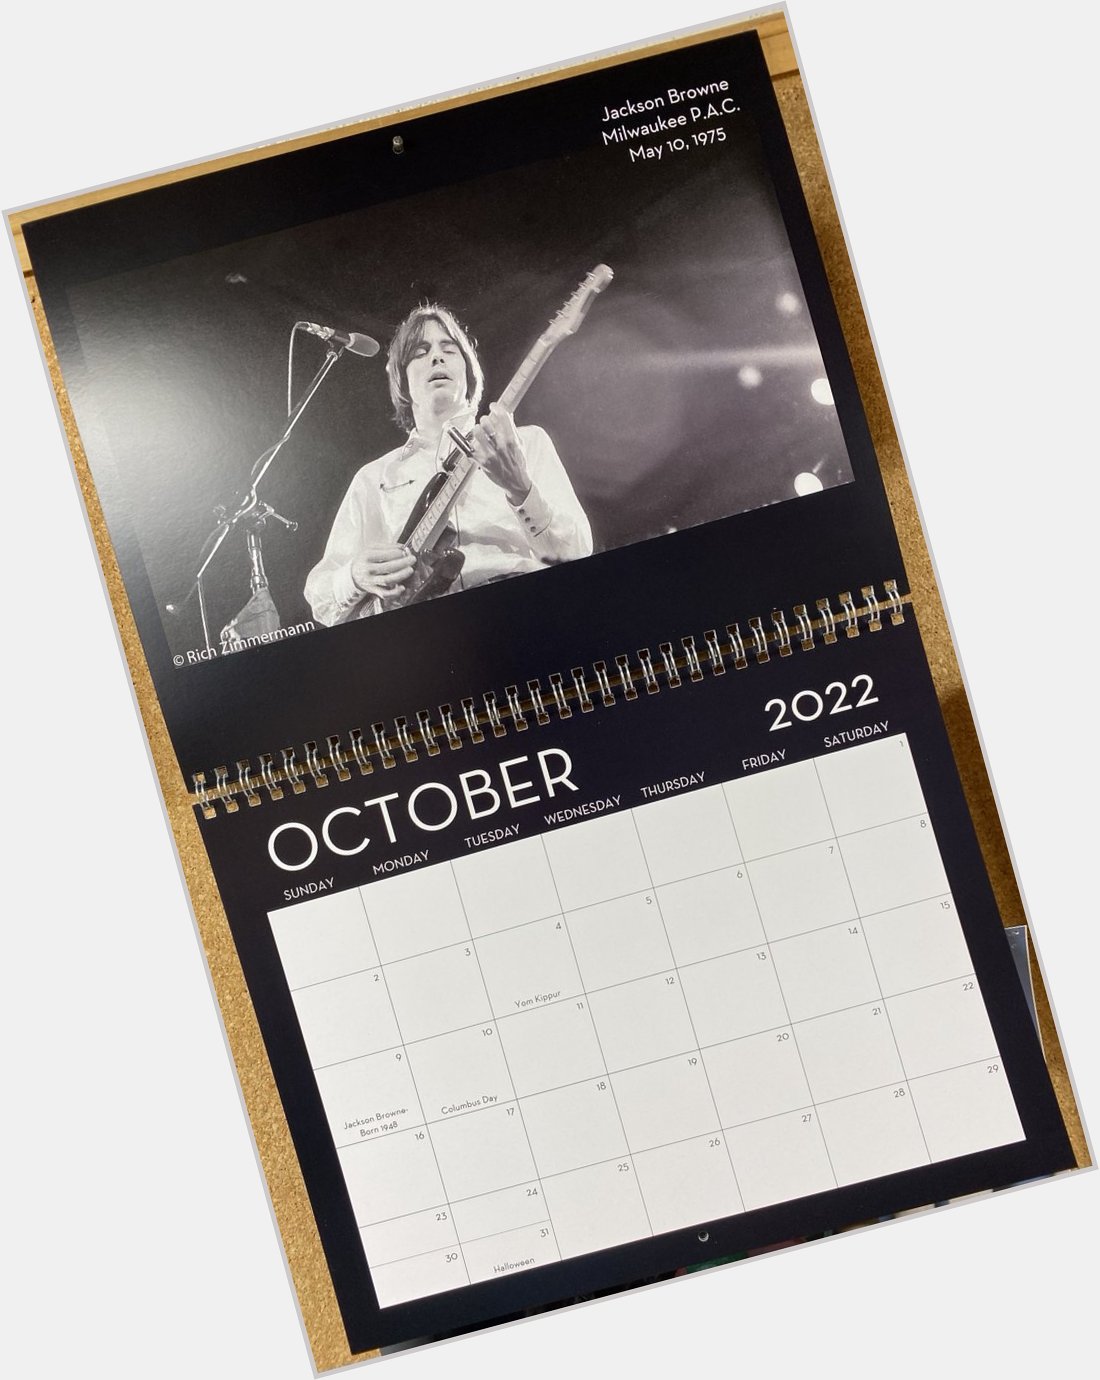 Happy birthday to Jackson Browne!
My Rich Zimmermann Photography calendar musician of the month! 